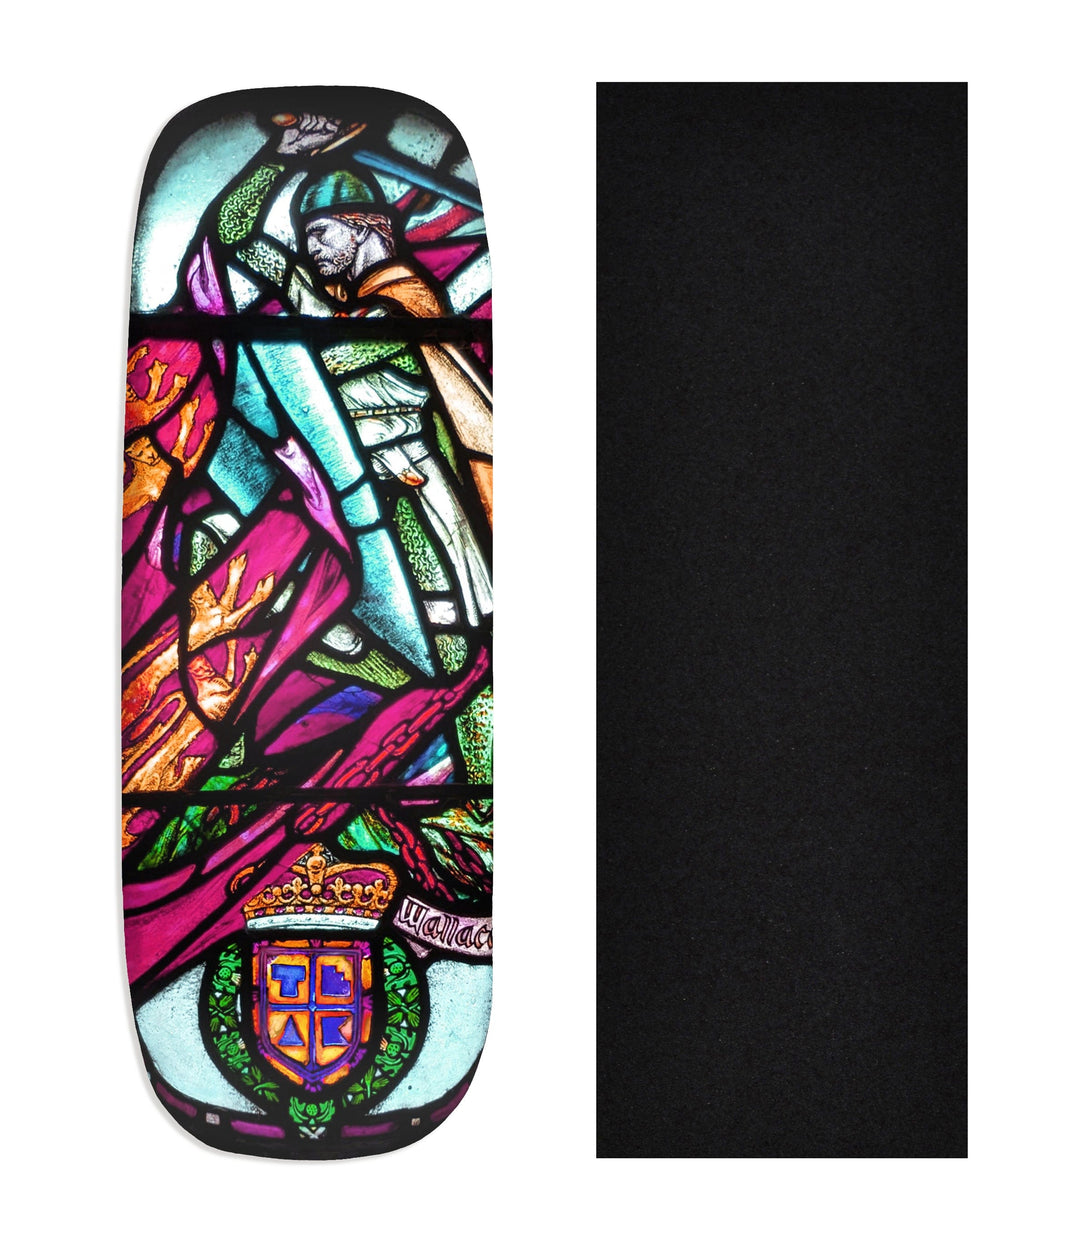 Teak Tuning Heat Transfer Graphic Wooden Fingerboard Deck, "Wallace Stained Glass" Boxy Deck